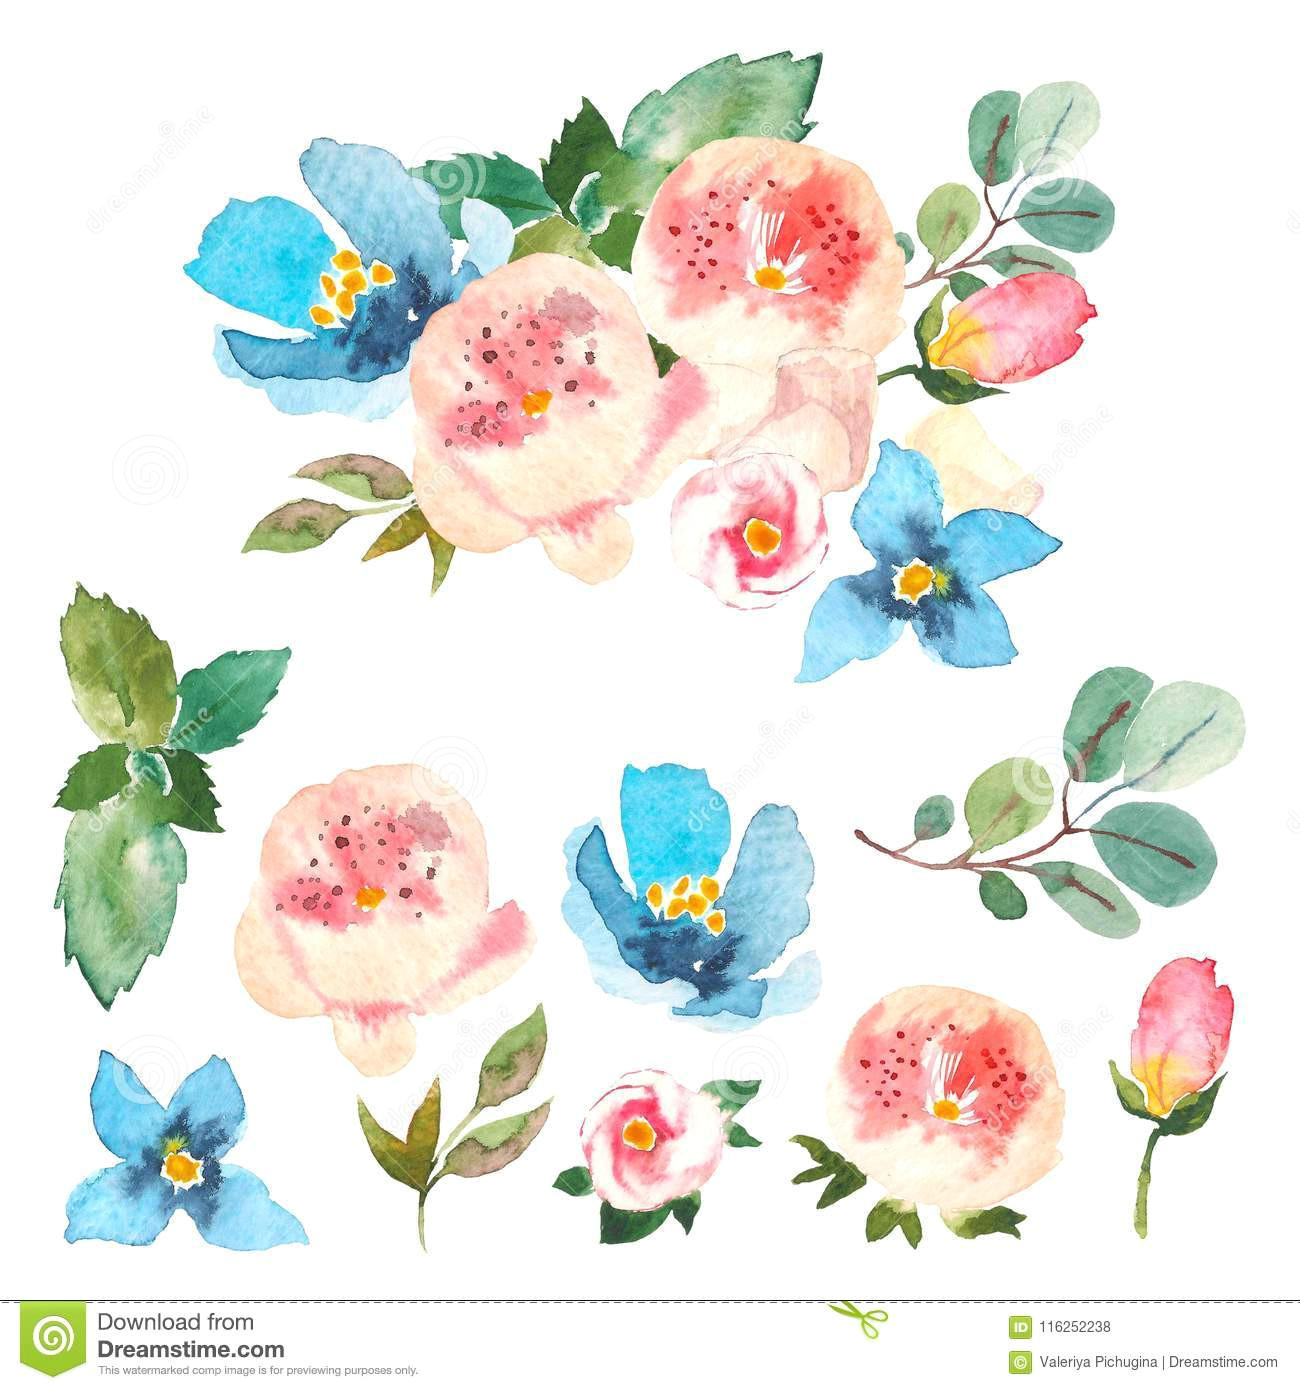 Drawing Of Flowers and Leaves Watercolor Floral Set Colorful Floral Collection with Leaves and